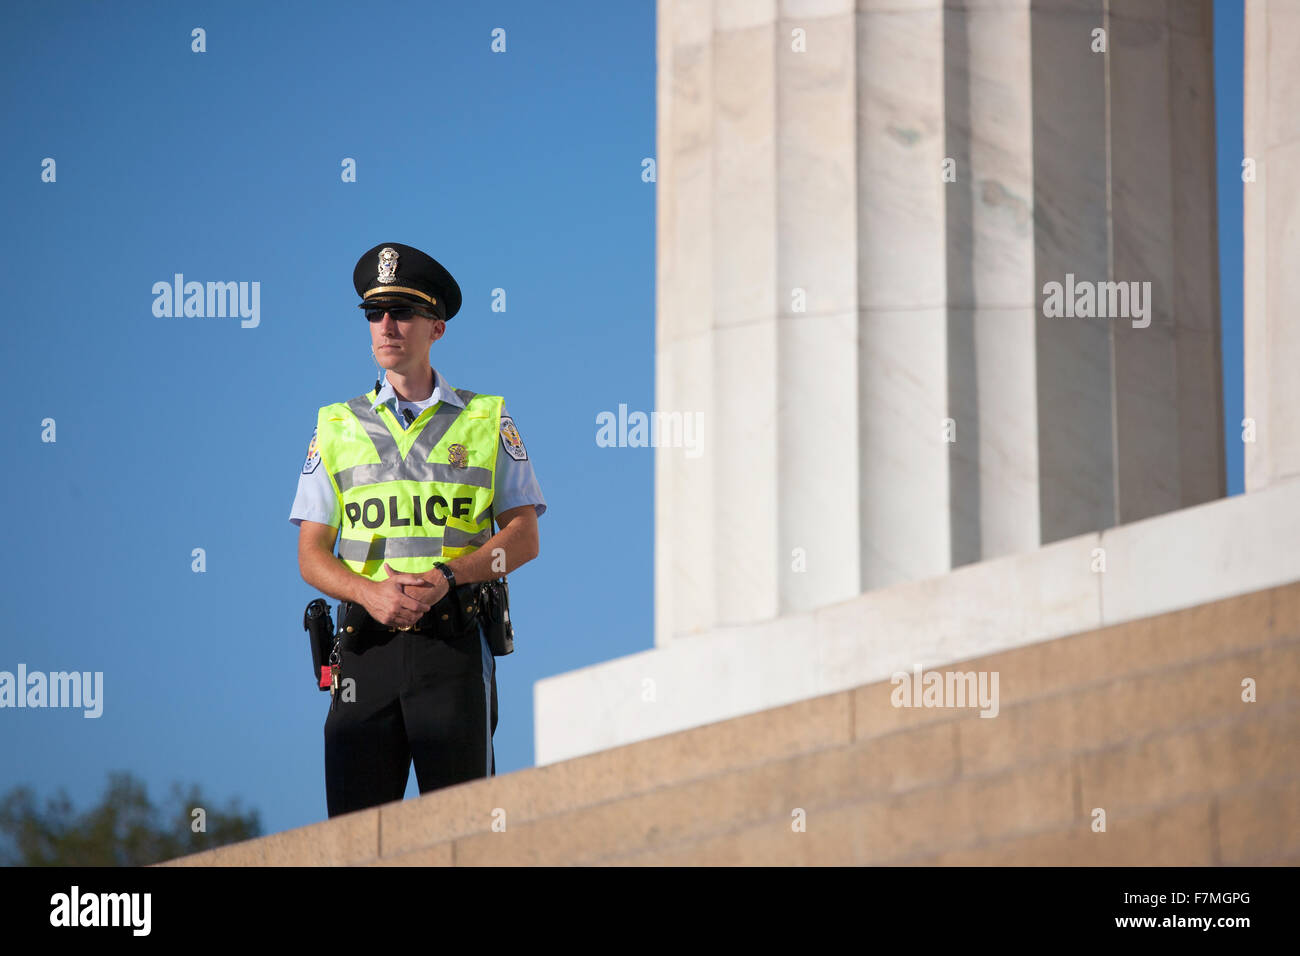 Policeman at the National Action to Realize the Dream march and rally for the 50th Anniversary of the march on Washington and Martin Luther King's I Have A Dream Speech, August 24, 2013, Lincoln Memorial, Washington, D.C. Stock Photo